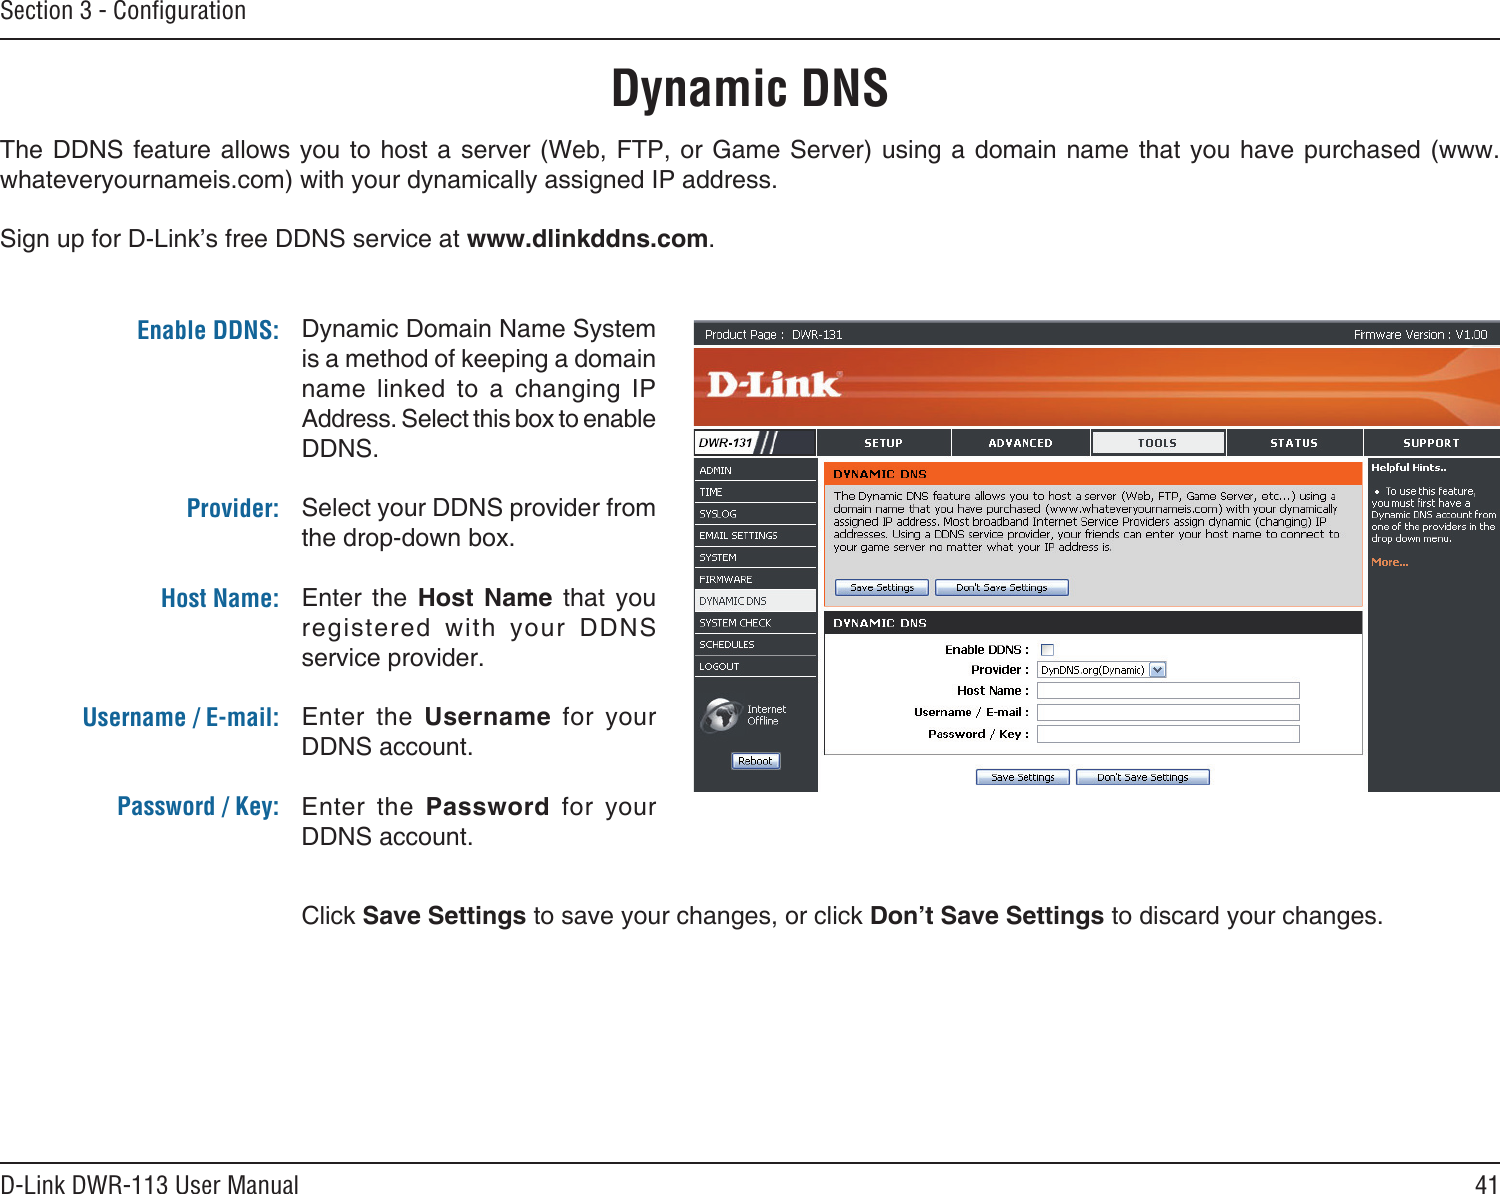 41D-Link DWR-113 User ManualSection 3 - ConﬁgurationDynamic DNSDynamic Domain Name System is a method of keeping a domain name  linked  to  a  changing  IP Address. Select this box to enable DDNS.Select your DDNS provider from the drop-down box.Enter  the  Host  Name  that  you registered  with  your  DDNS service provider.Enter  the  Username  for  your DDNS account.Enter  the  Password  for  your DDNS account.The DDNS  feature  allows  you  to host a server (Web, FTP, or  Game  Server)  using  a domain name that you have purchased (www.whateveryournameis.com) with your dynamically assigned IP address.Sign up for D-Link’s free DDNS service at www.dlinkddns.com.Enable DDNS:Provider: Host Name:Username / E-mail: Password / Key:Click Save Settings to save your changes, or click Don’t Save Settings to discard your changes.